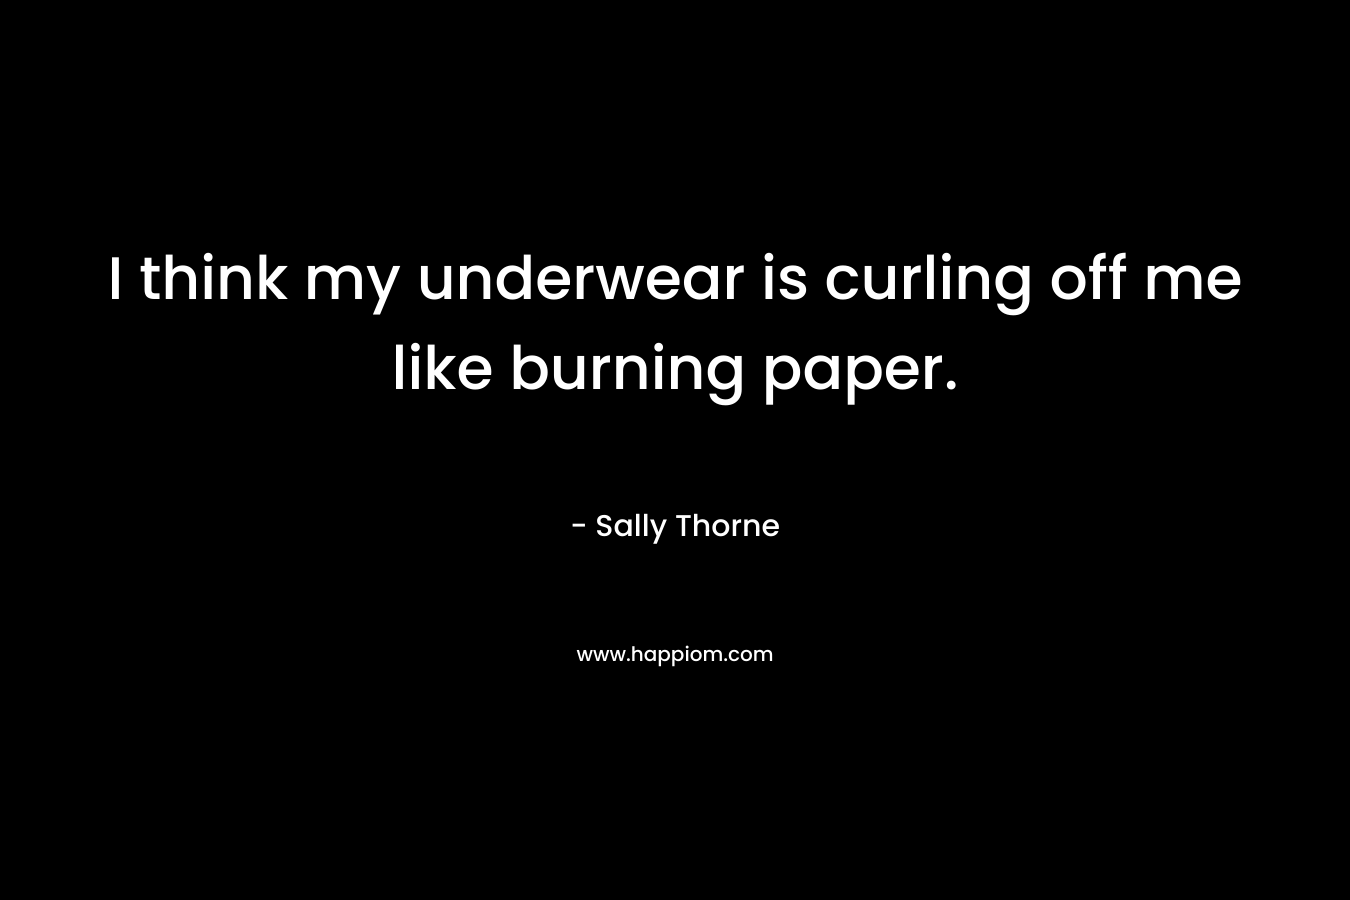 I think my underwear is curling off me like burning paper.